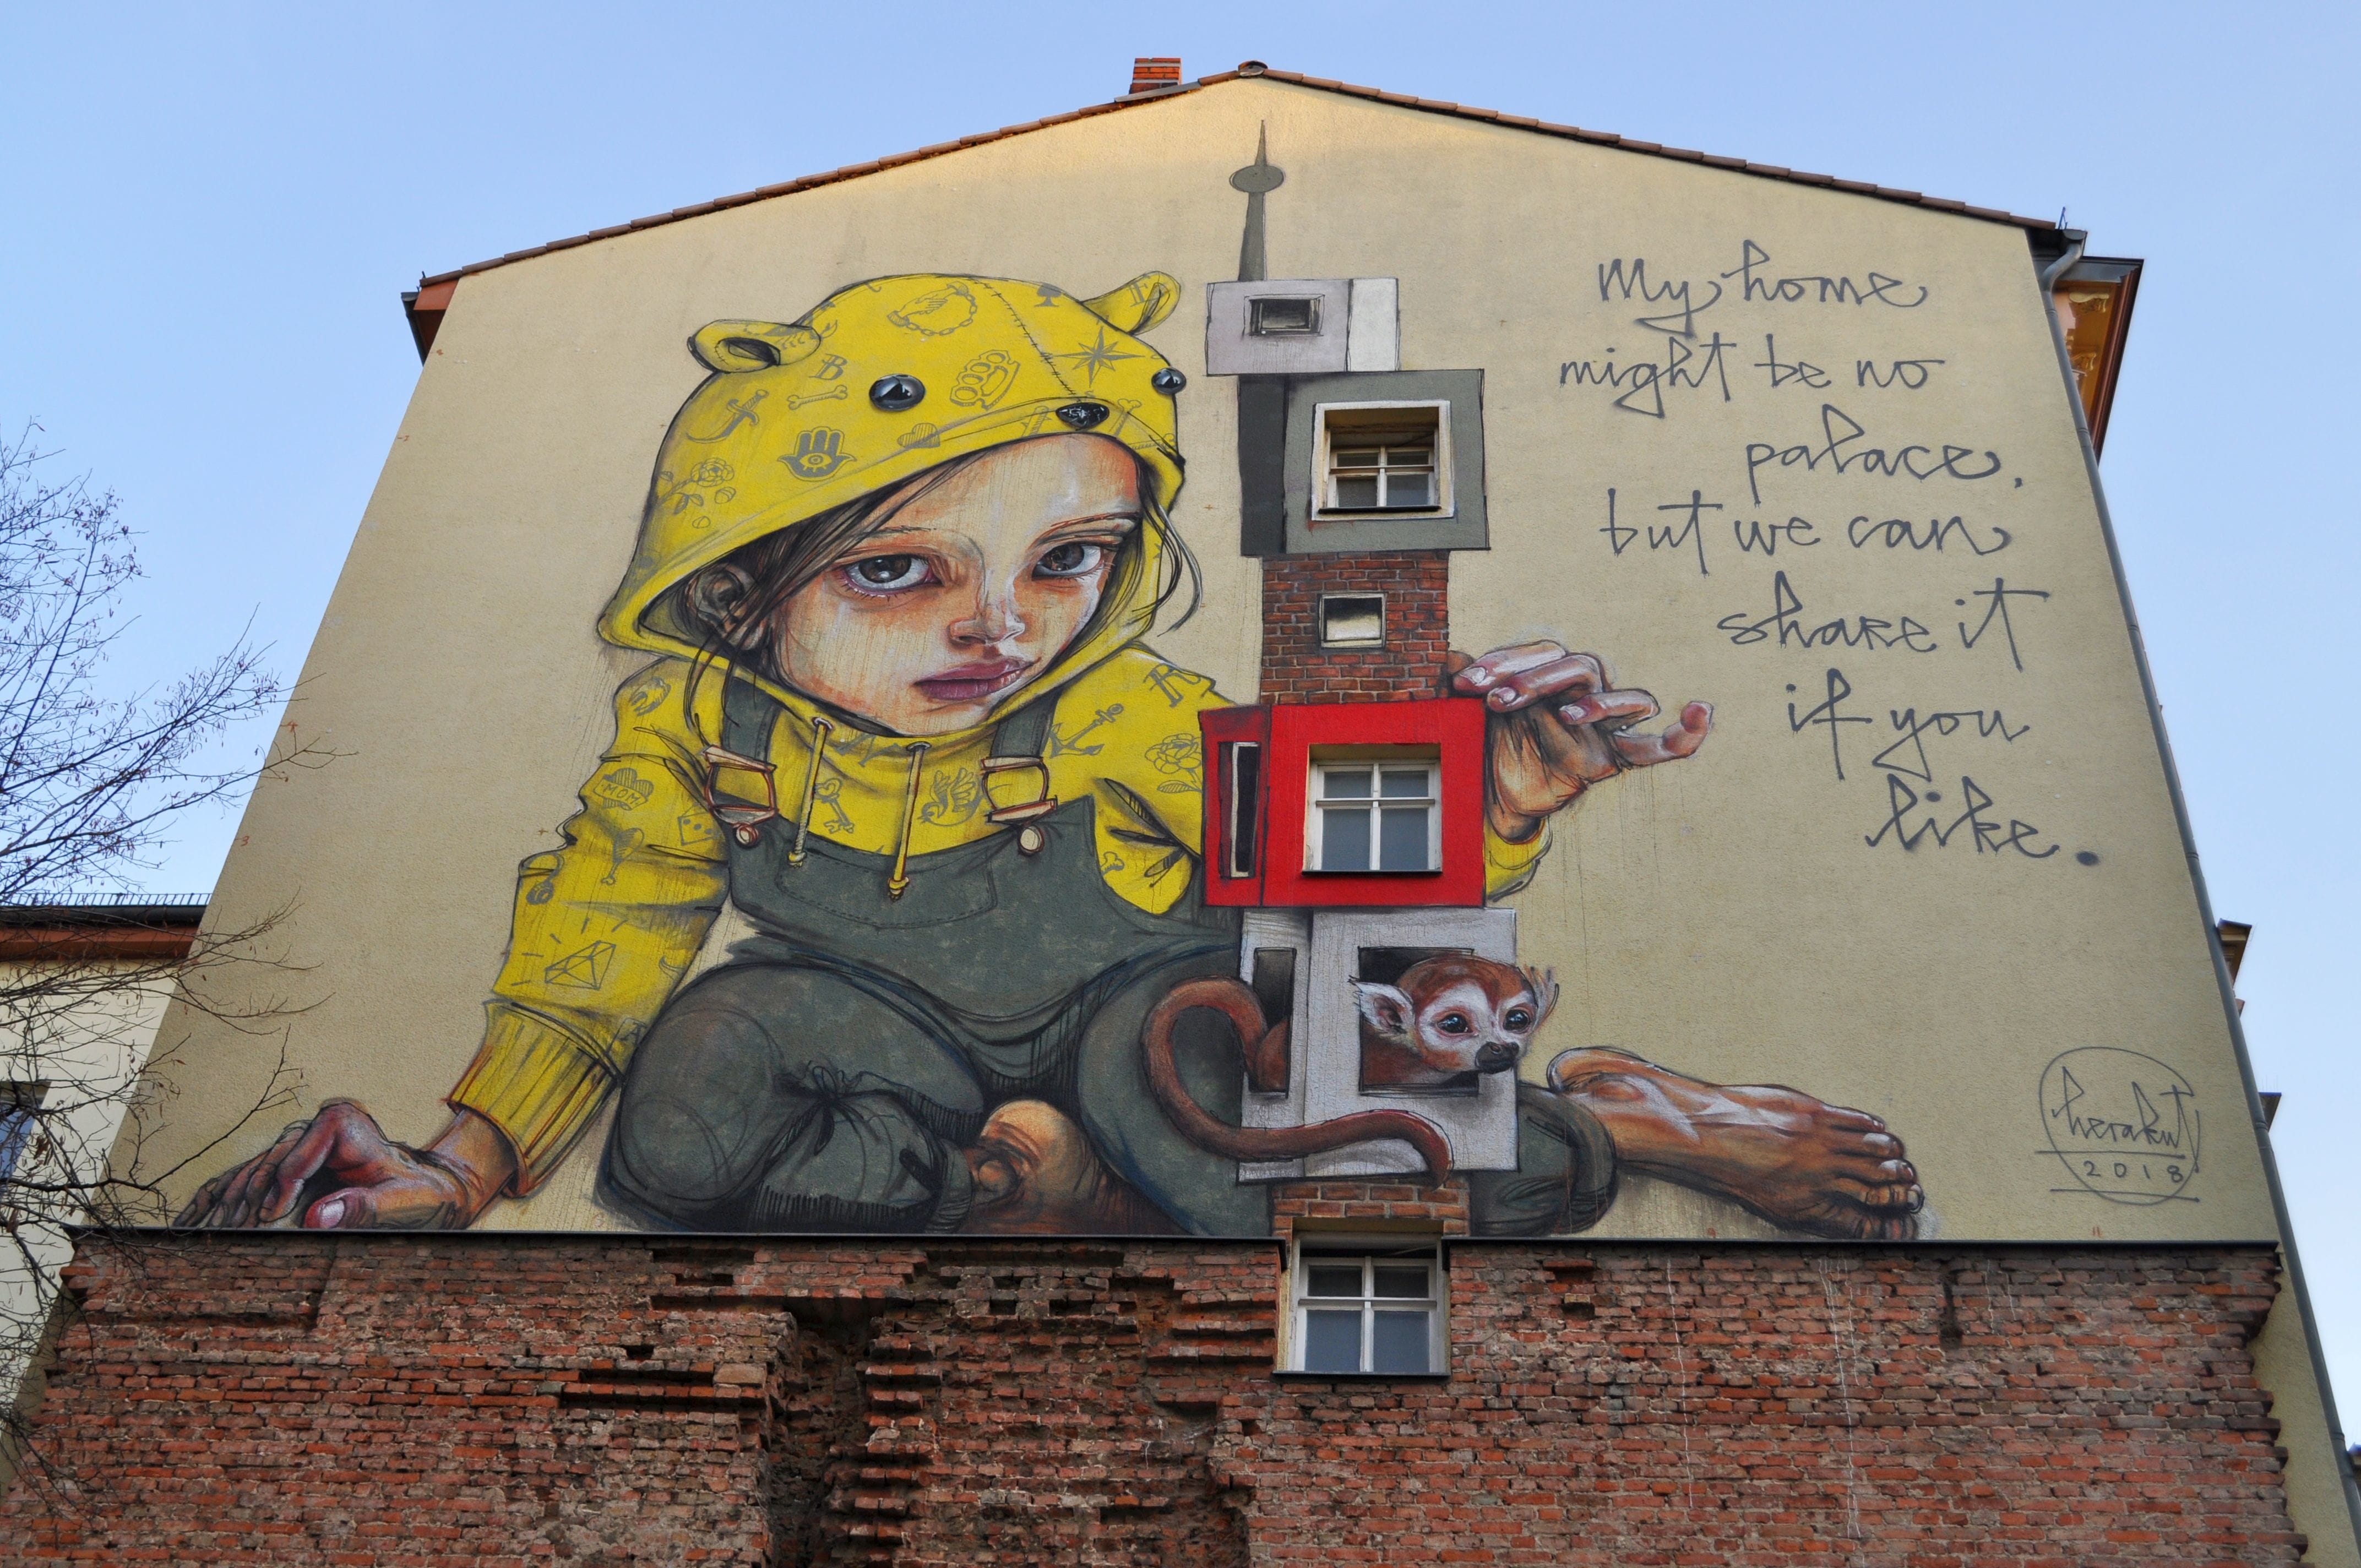 Graffiti 4538 My home might be no palace, but we can shake it if you like by the artist Herakut captured by elettrotajik in Berlin Germany